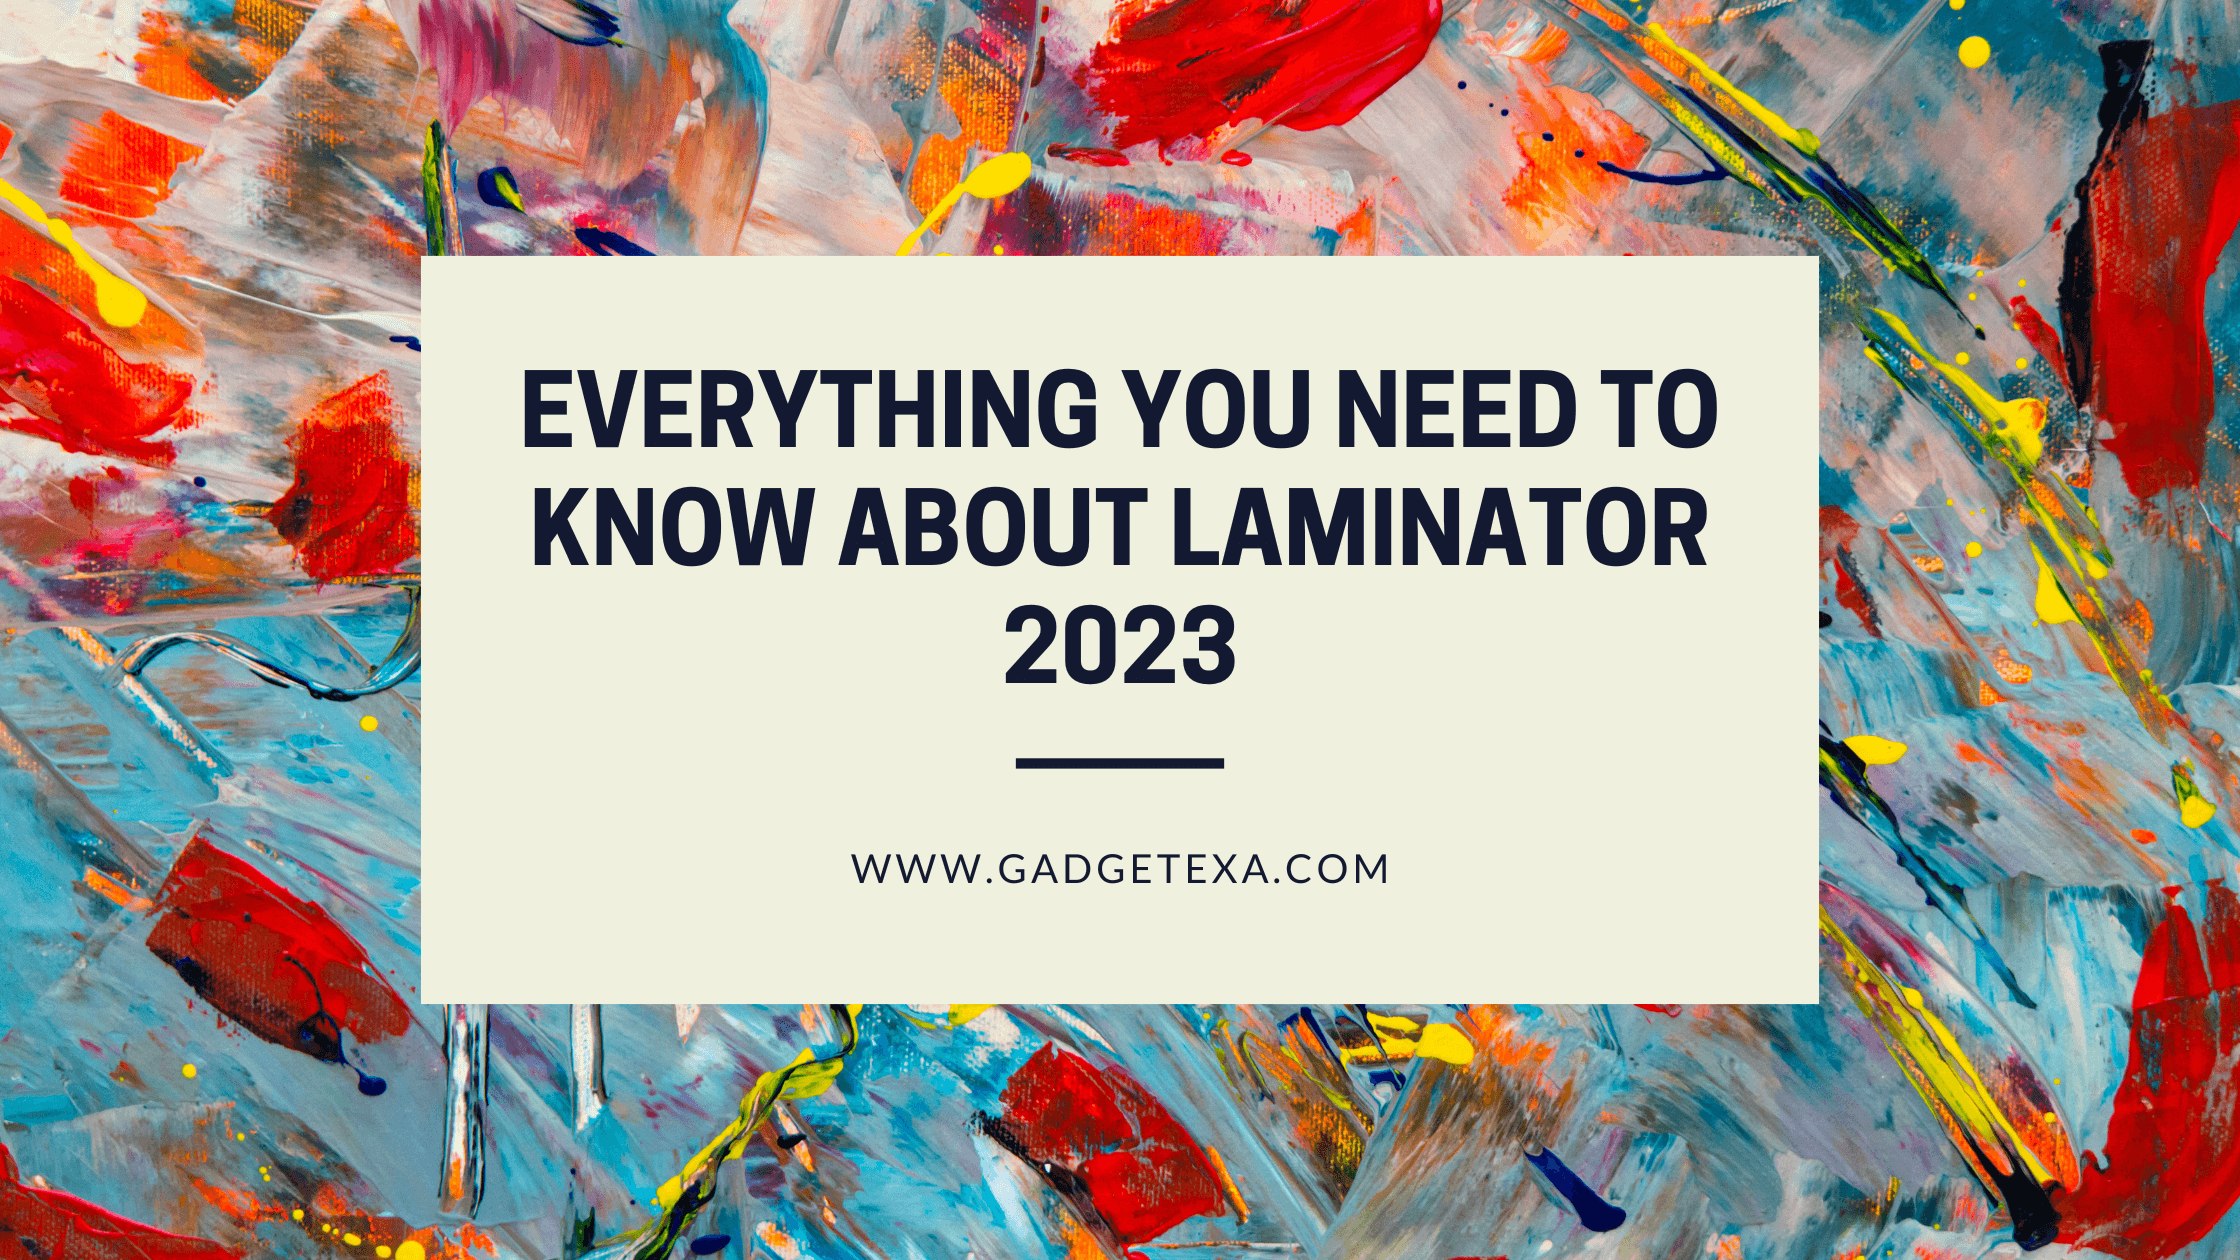 You are currently viewing Everything You Need to Know About Laminator 2023